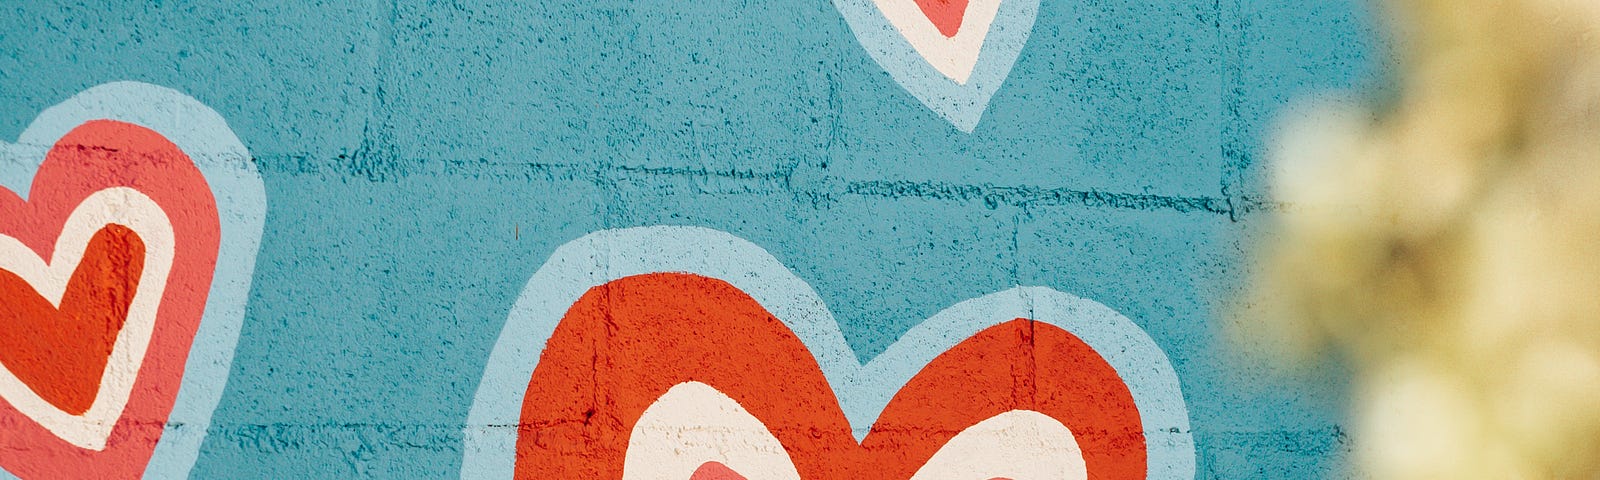 Pink hearts outlined in white, red and light blue painted on a blue cinder block wall.